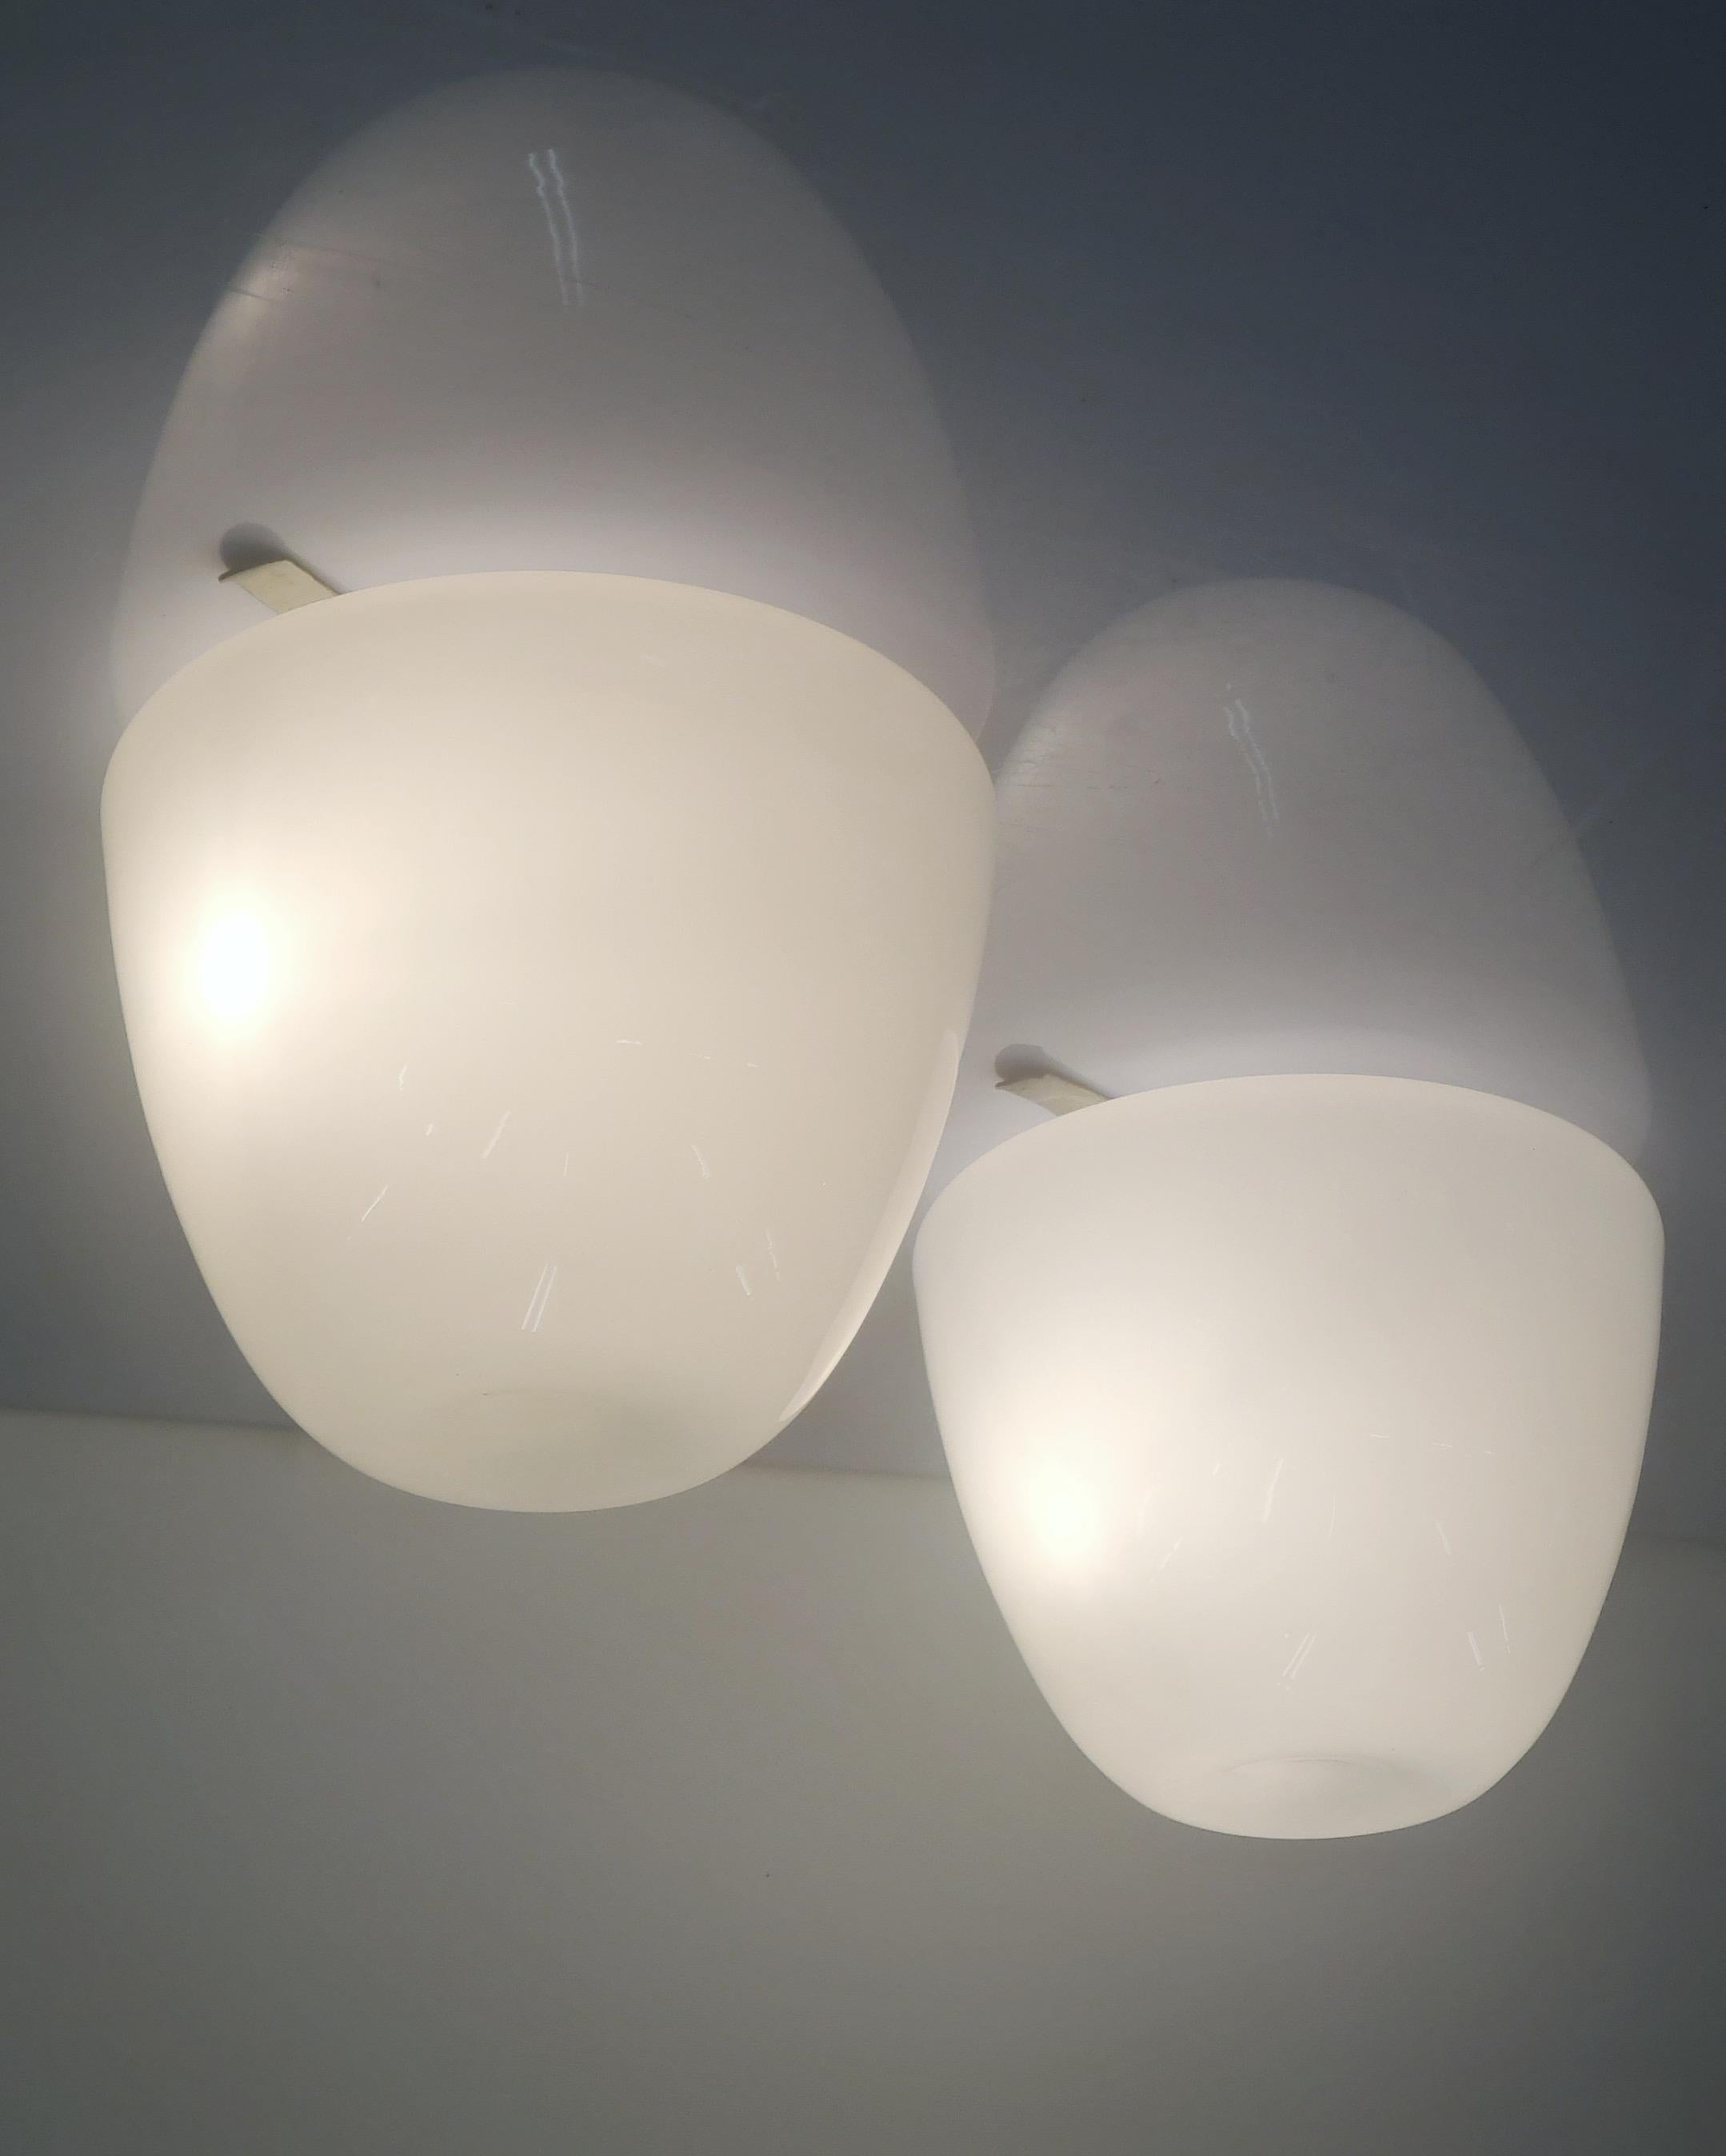 An elegant pair of ceiling lamps model 80112/80115, designed by Gunnel Nyman and manufactured by Idman in Finland in the 1950s. This very minimal design fits easily into any interior. As with a lot of Scandinavian design the beauty of these lamps